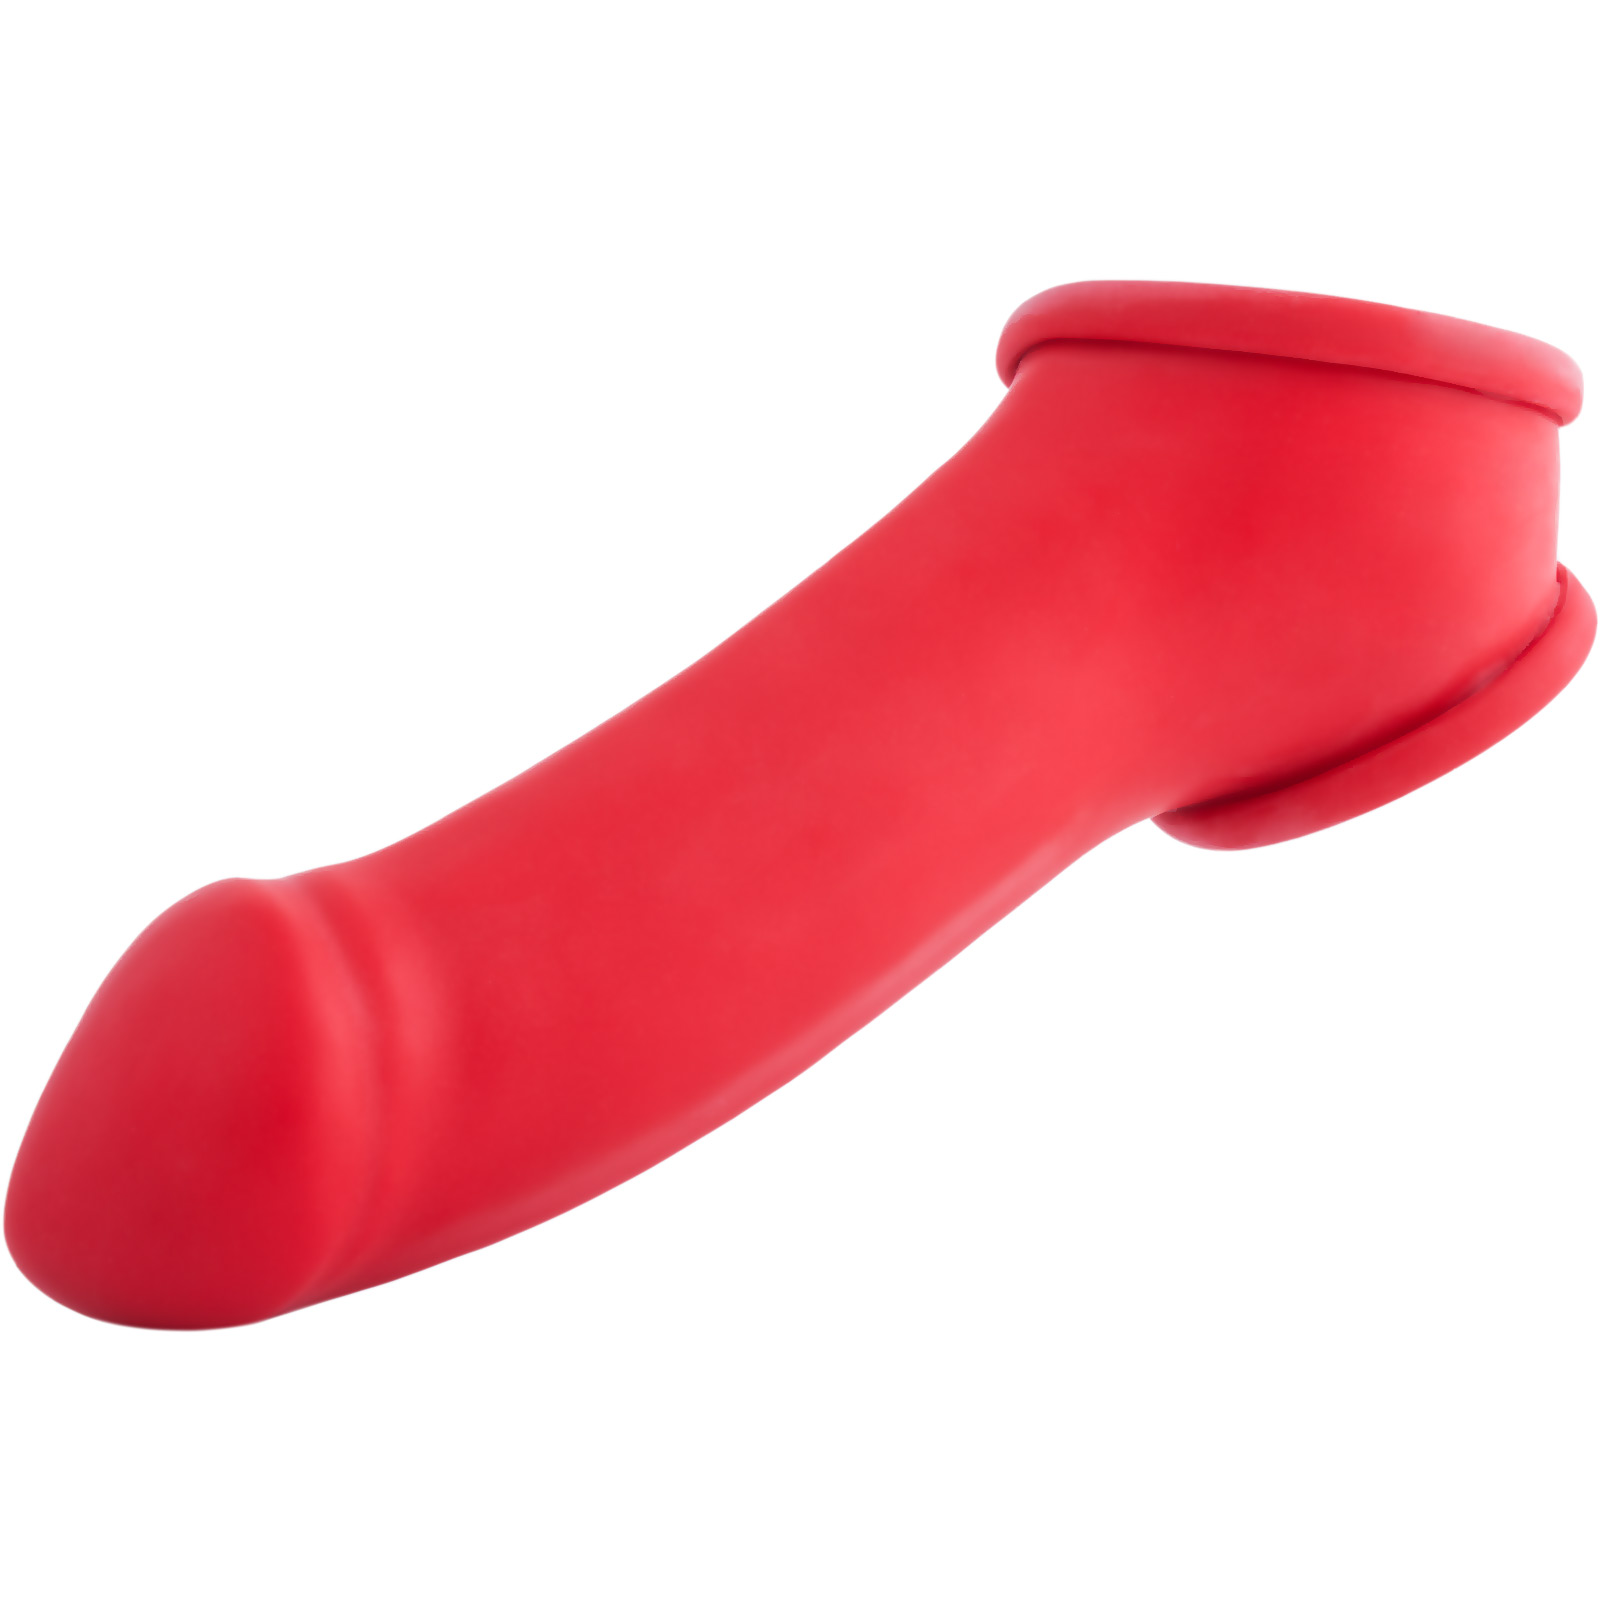 Toylie Latex Penis Sleeve «ERIK» red, with molded glans and testicle ring